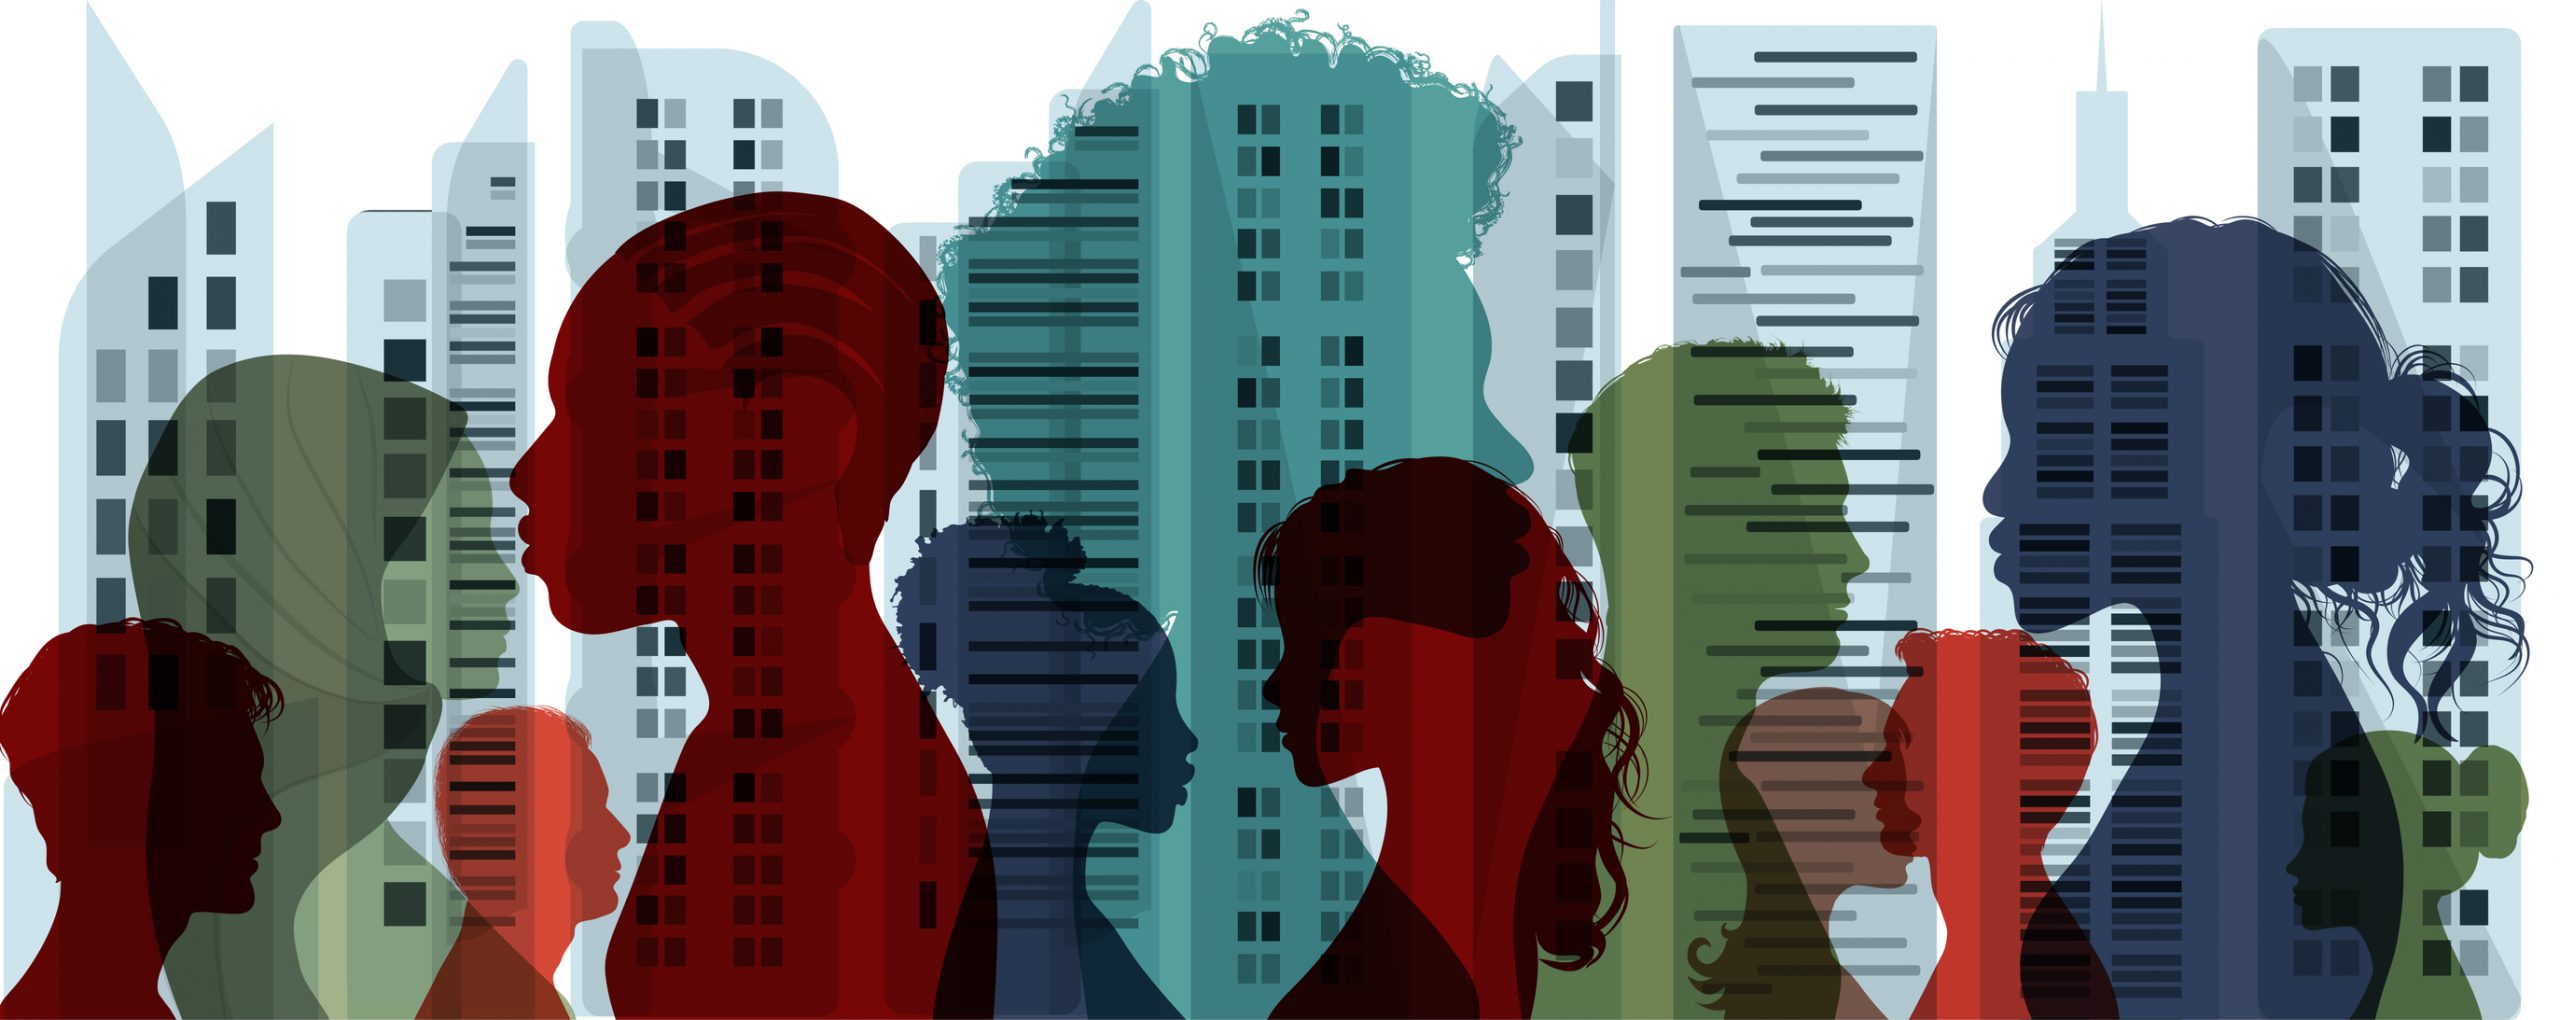 abstract illustration of diversity on city backdrop